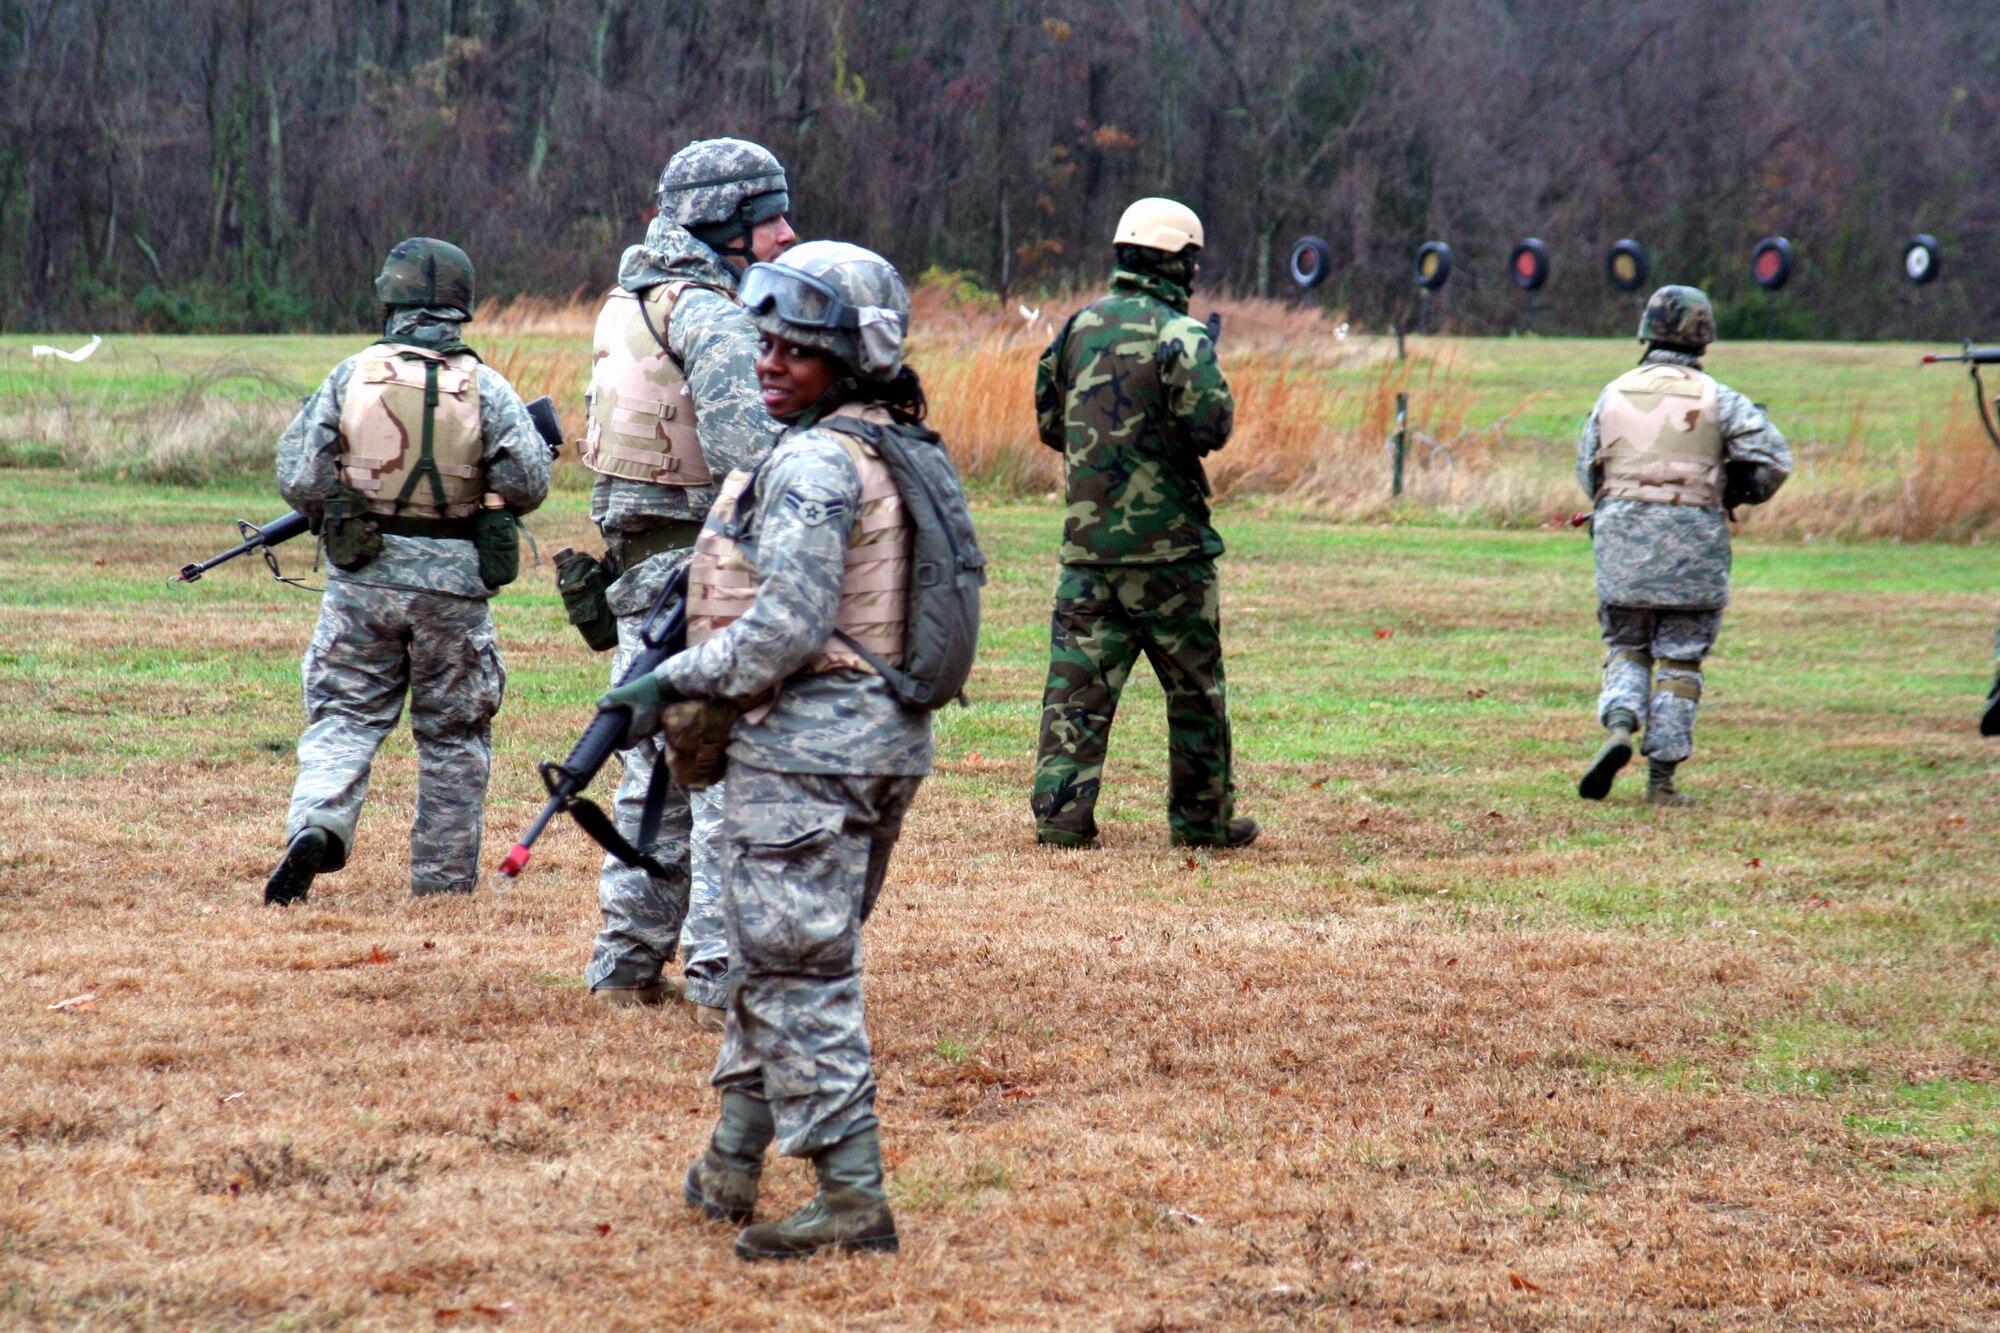 Students in the Combat Airman Skills Training Course 10-1A practices dismounted patrolling tactics during course training on Nov. 12, 2009, on a range at Joint Base McGuire-Dix-Lakehurst, N.J.  The course, taught by the U.S. Air Force Expeditionary Center's 421st Combat Training Squadron, prepares Airmen for upcoming deployments.  (U.S. Air Force Photo/Tech. Sgt. Scott T. Sturkol)